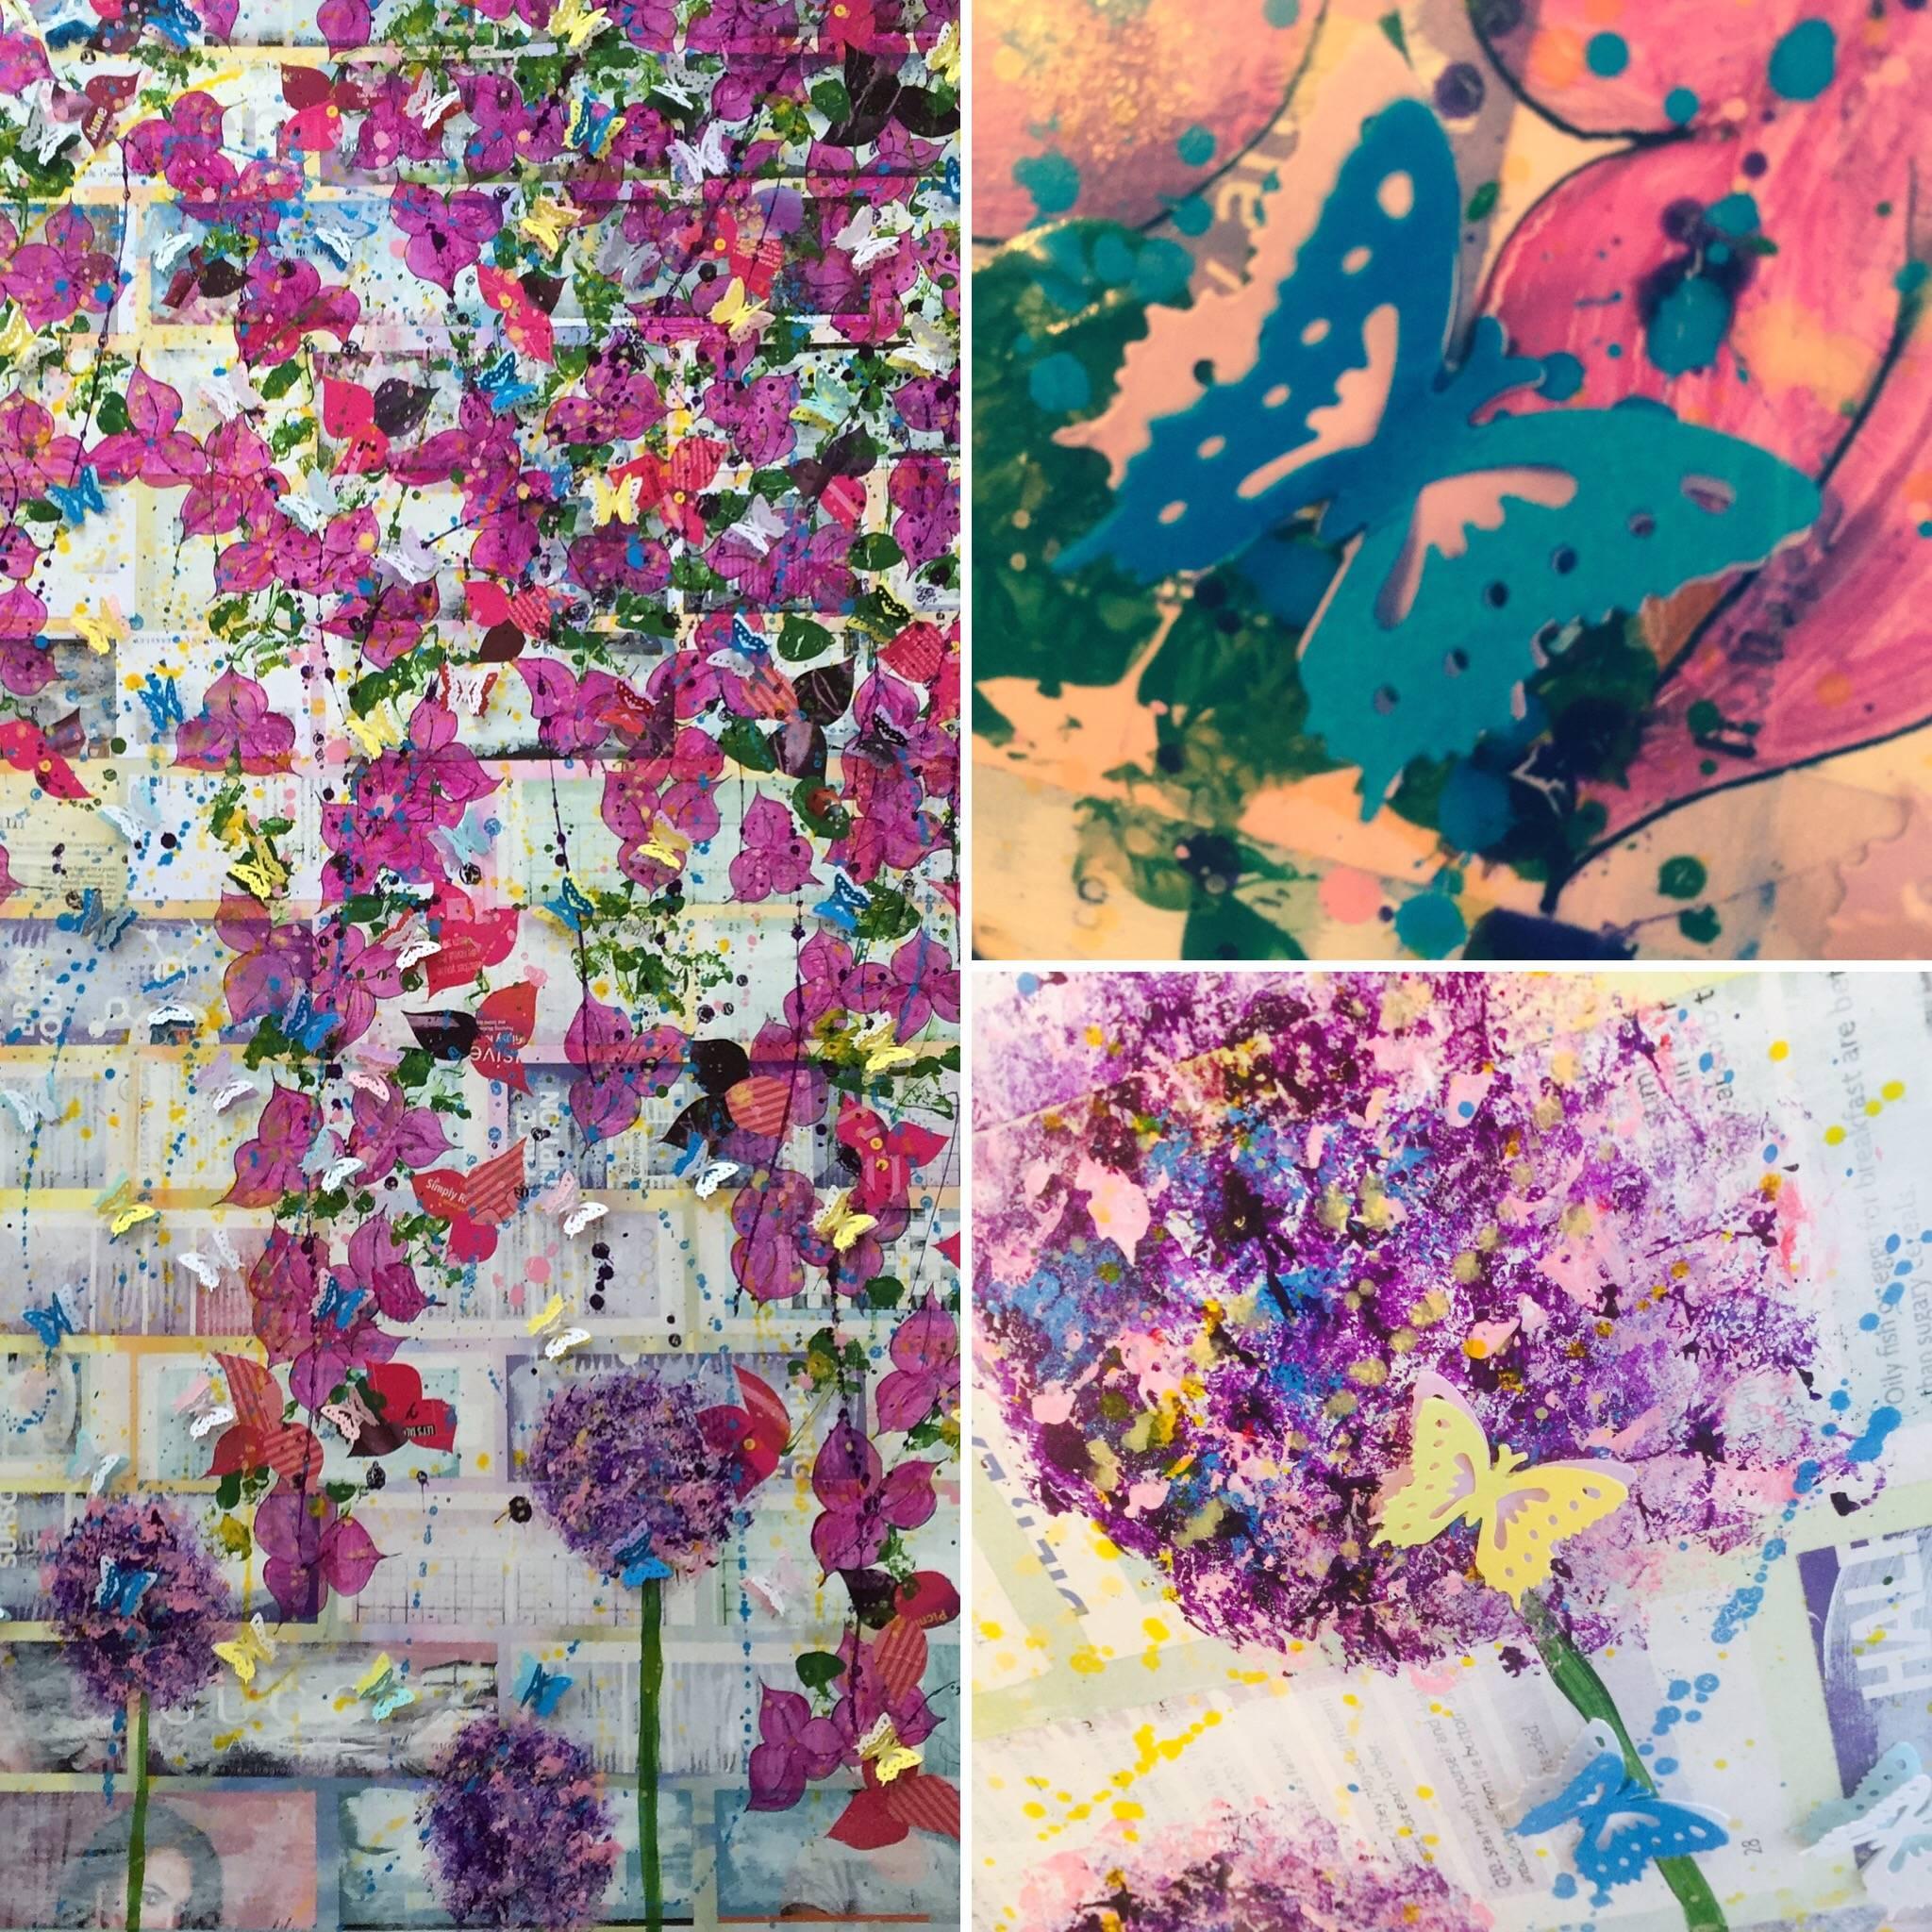 We are thrilled to be able to offer this piece.

Thornton works predominantly in acrylic, collage and mixed-media in a vibrant, contemporary style. Thornton's Butterfly Series in mixed-media adopts 3-D butterflies to beautifully represent scenarios,